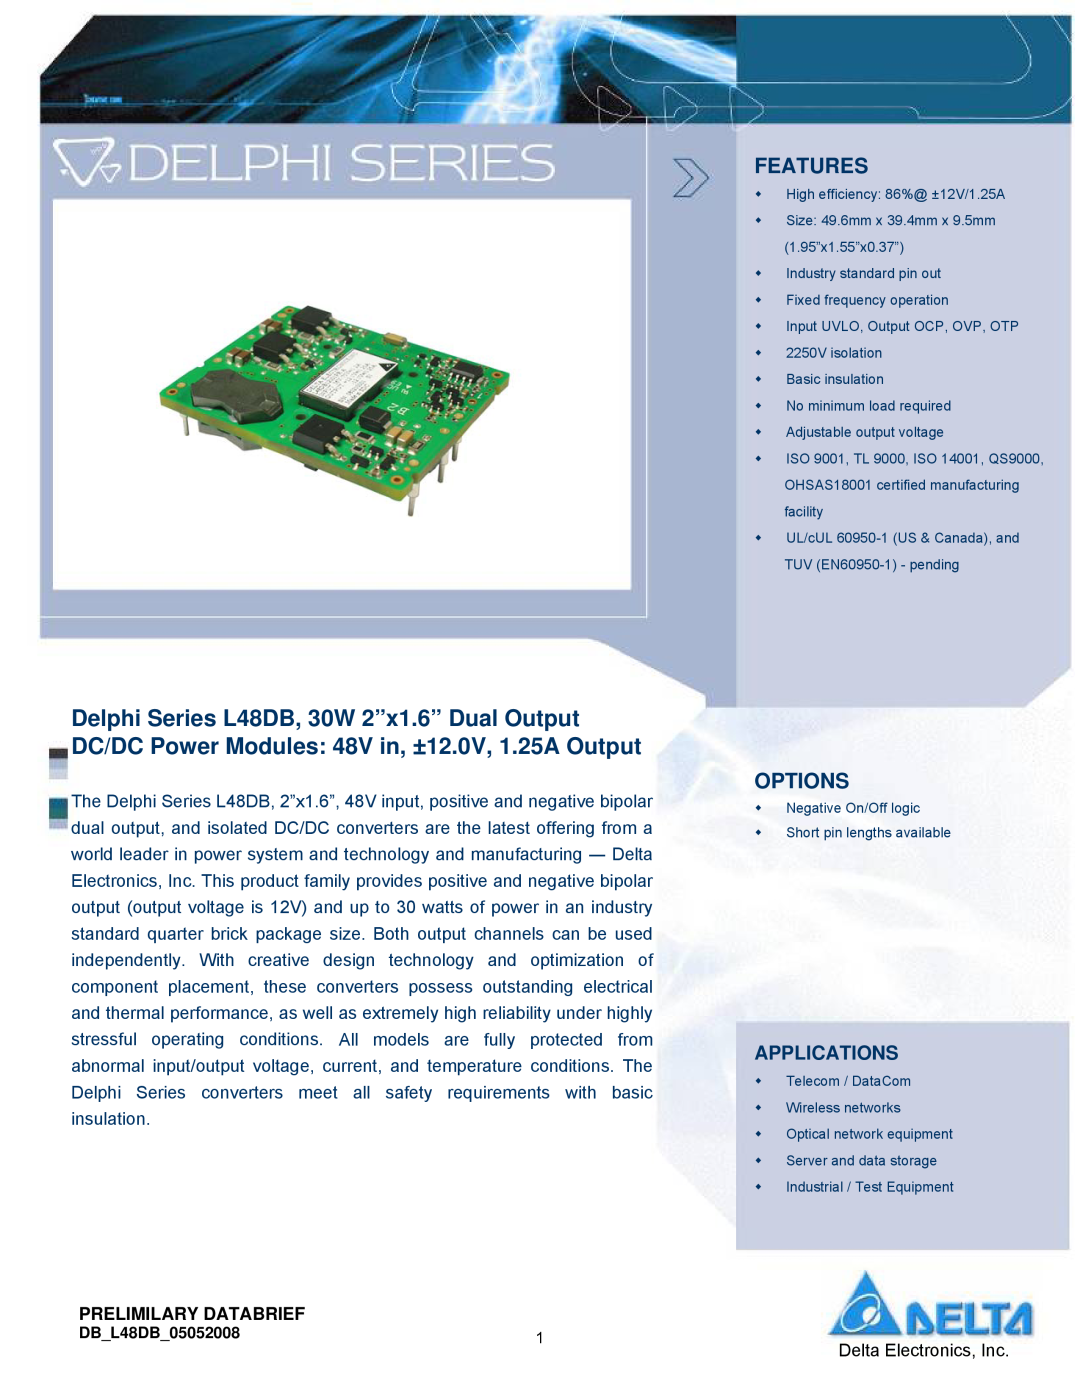 Delta Electronics Series L48DB manual Applications, Features, Options, Prelimilary Databrief 